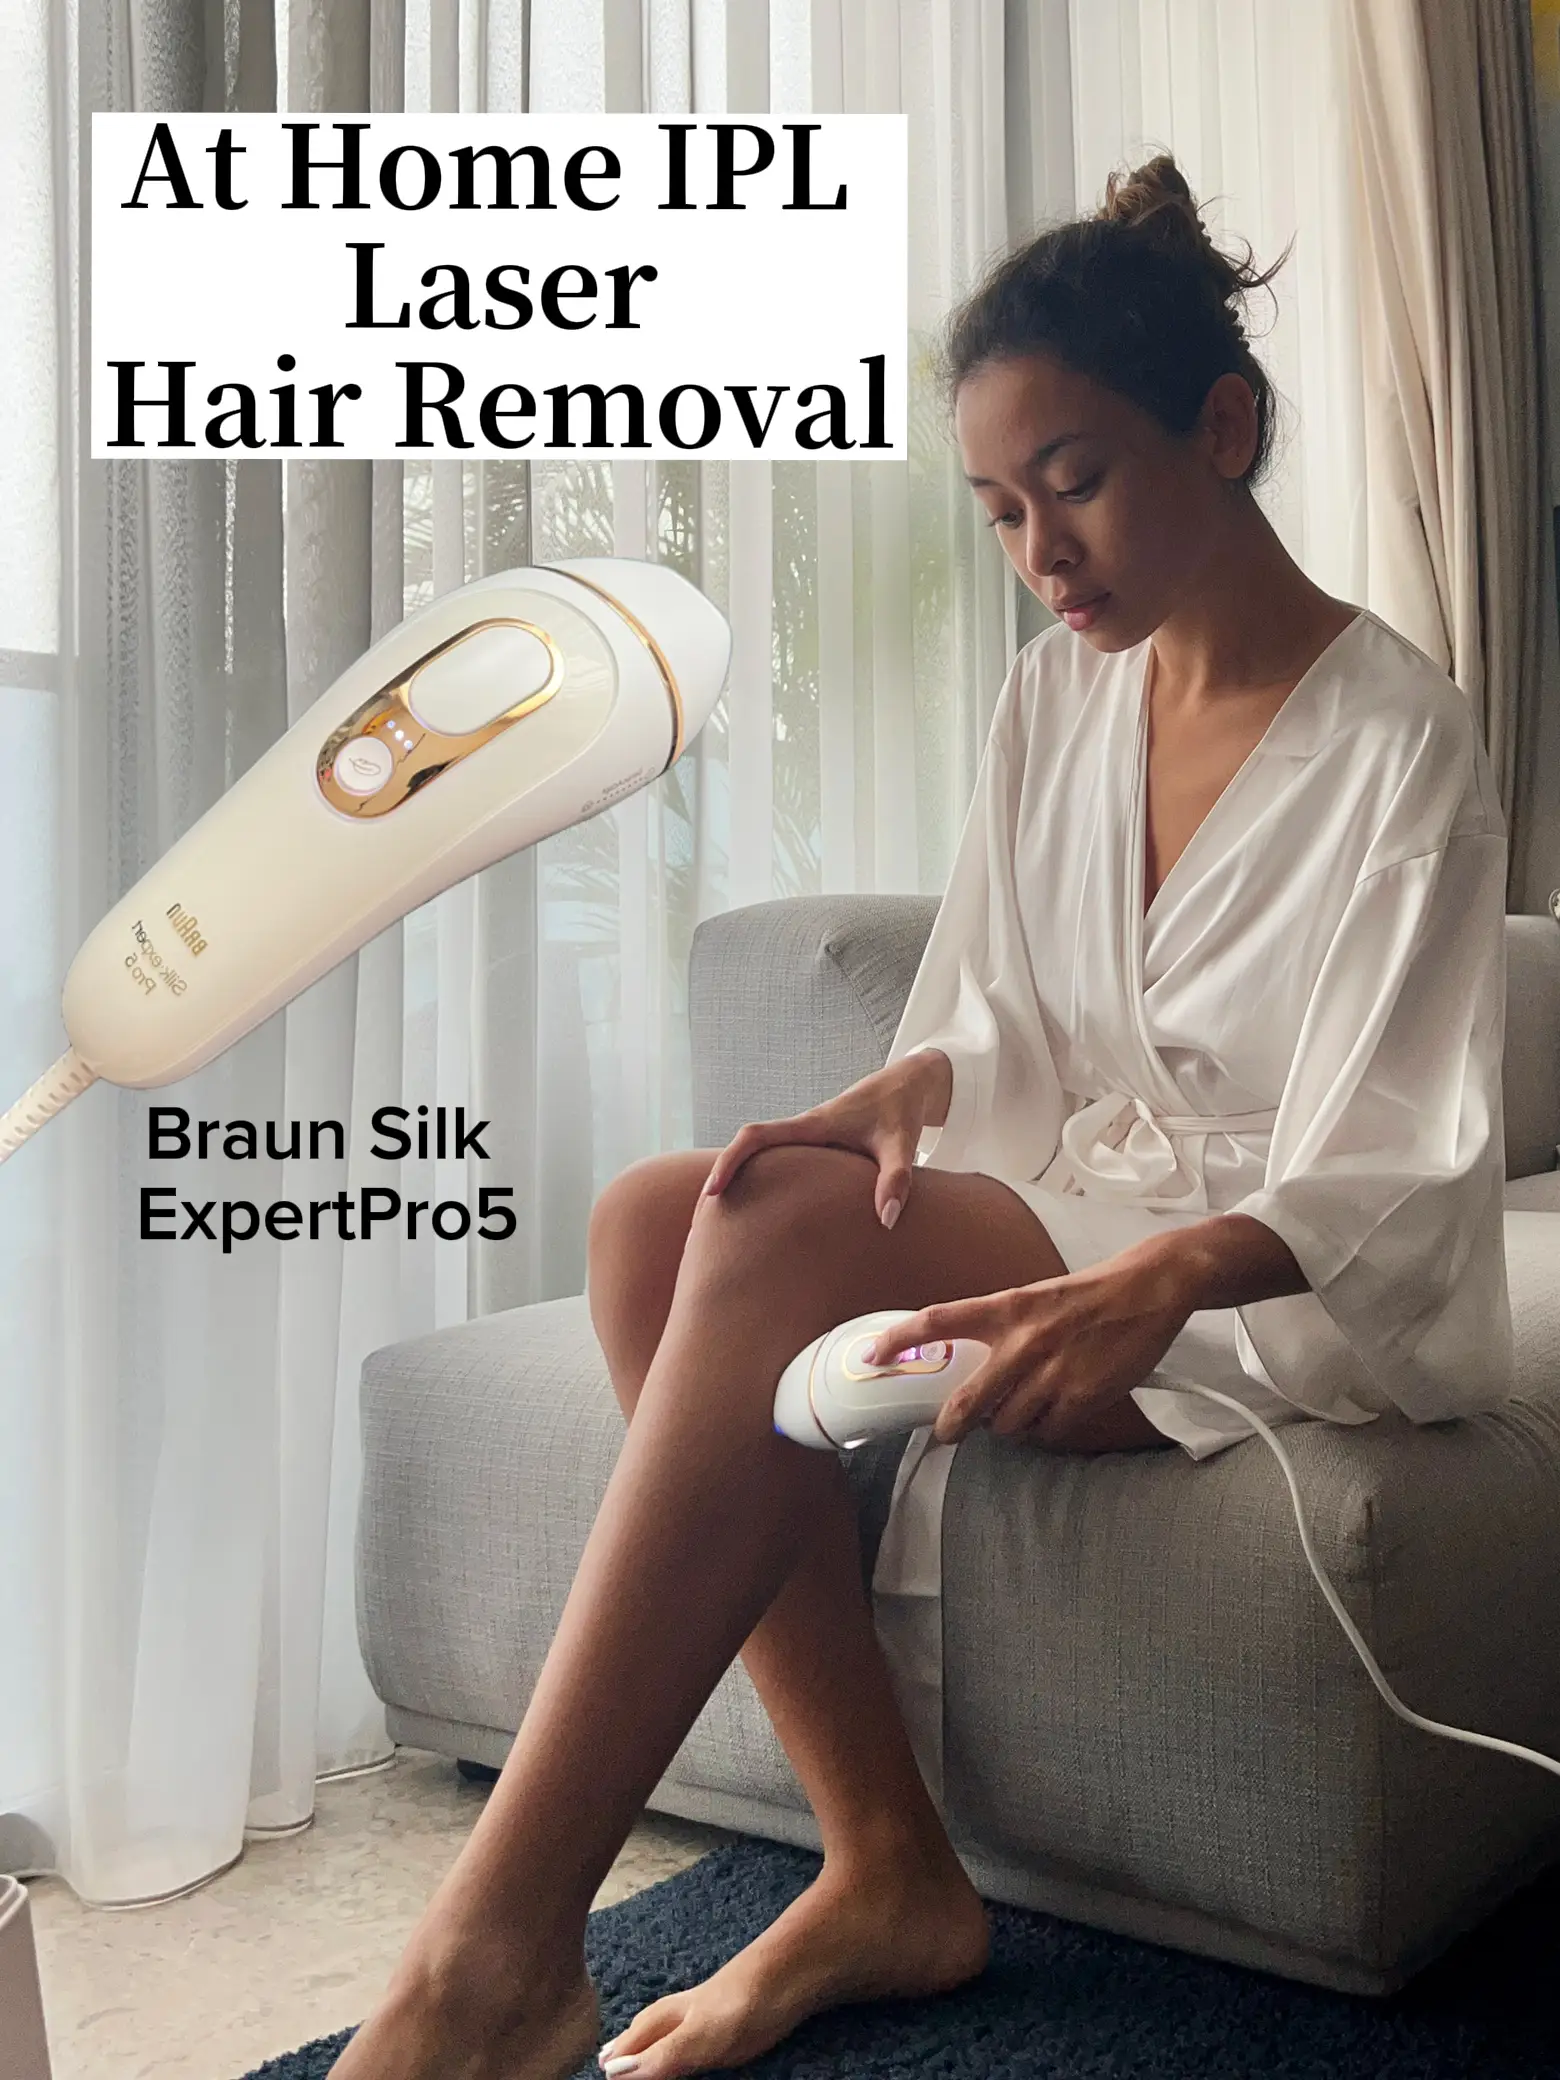 Braun Silk Expert Pro 5: Comparing 5 days of hair growth after treating  right leg for ~1mo : r/HairRemoval